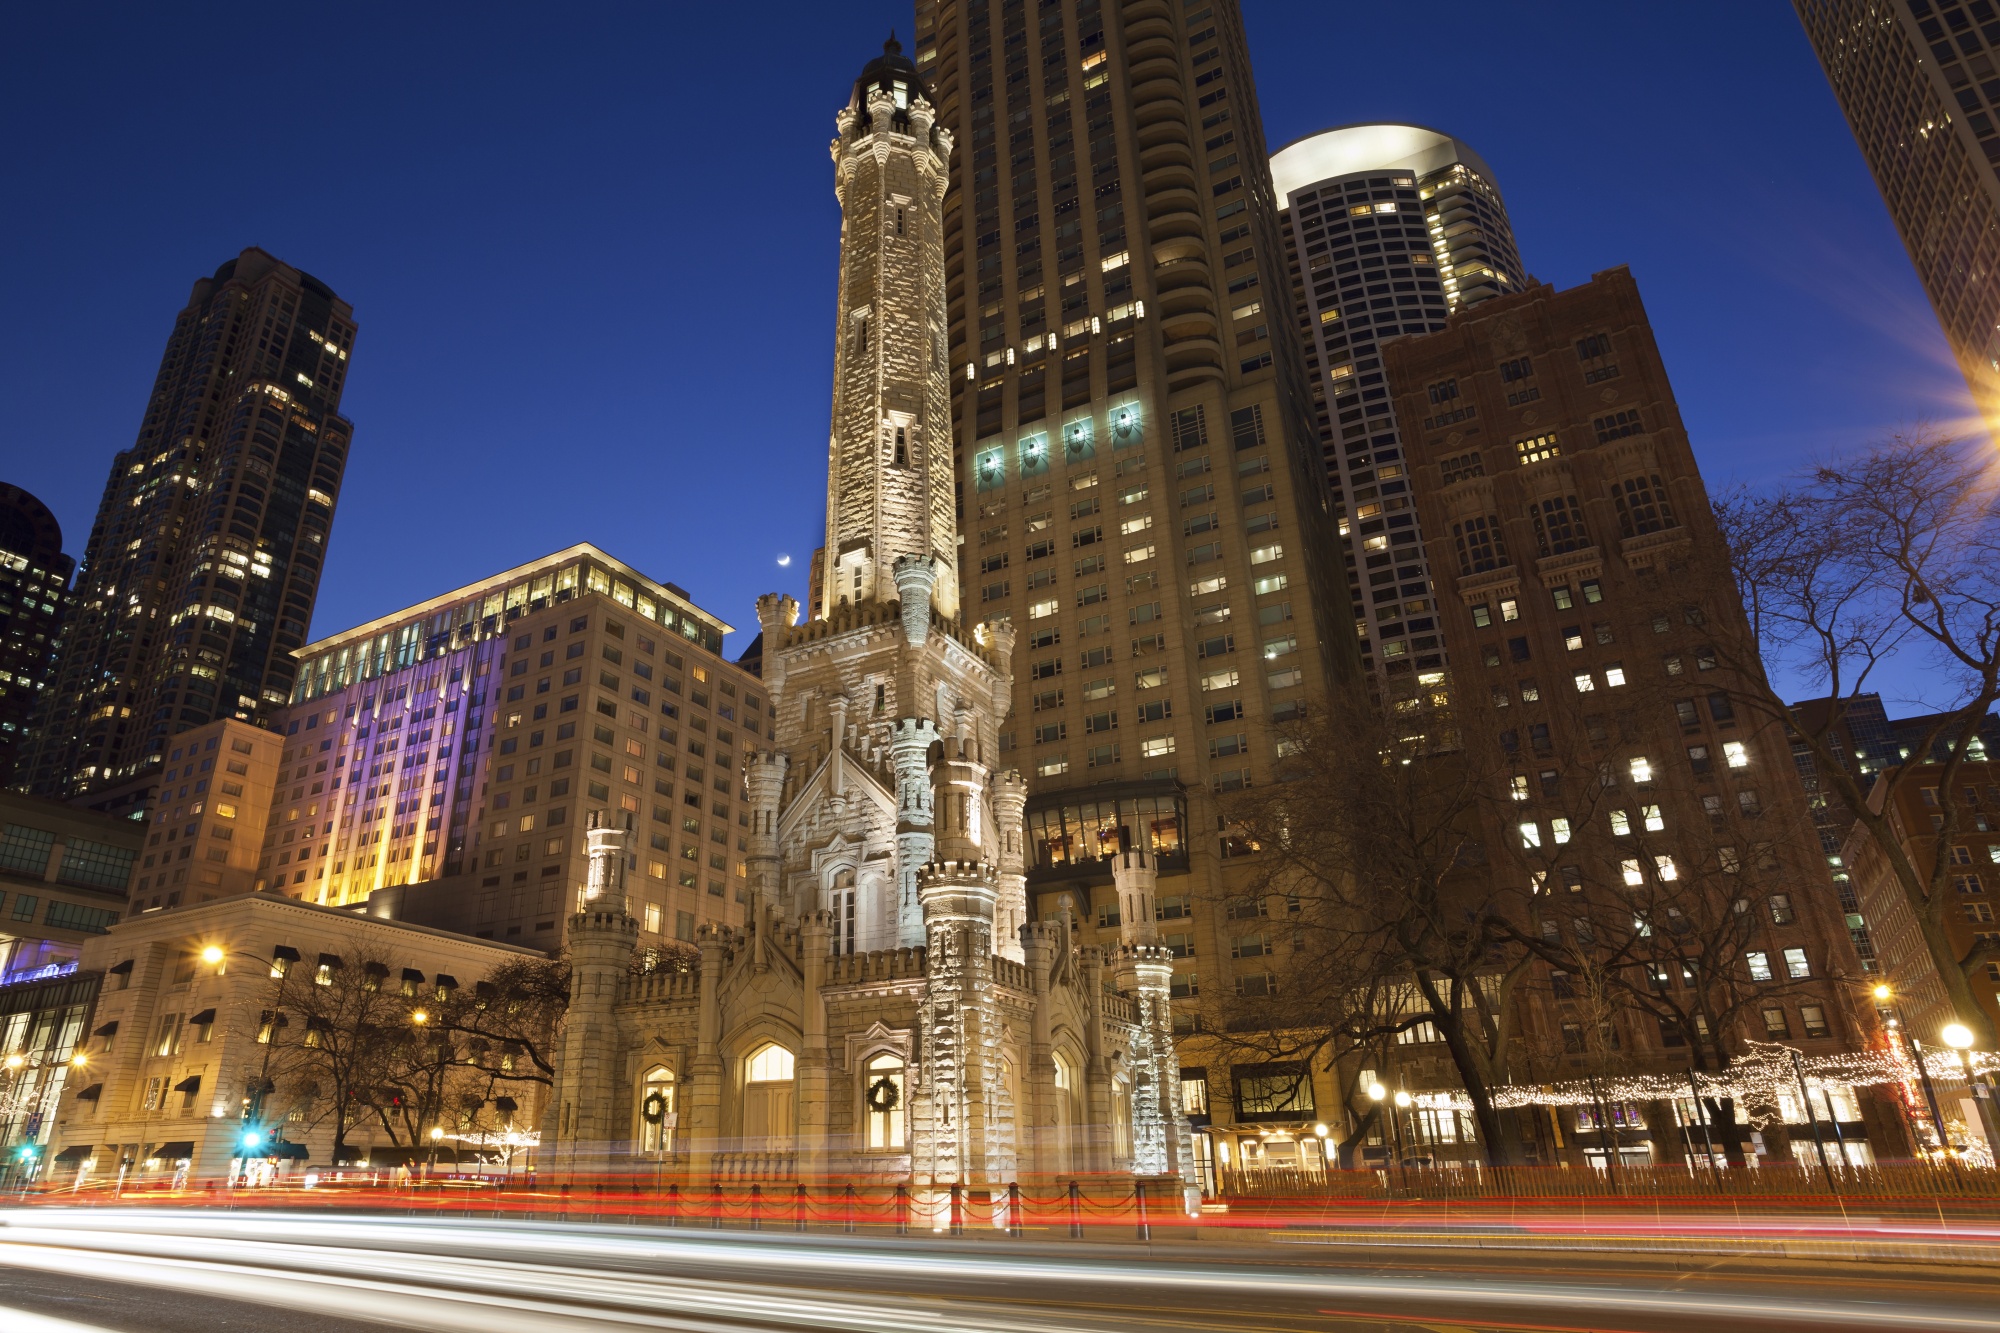 Louis Vuitton-Anchored Retail Space on Chicago's Mag Mile Goes Up